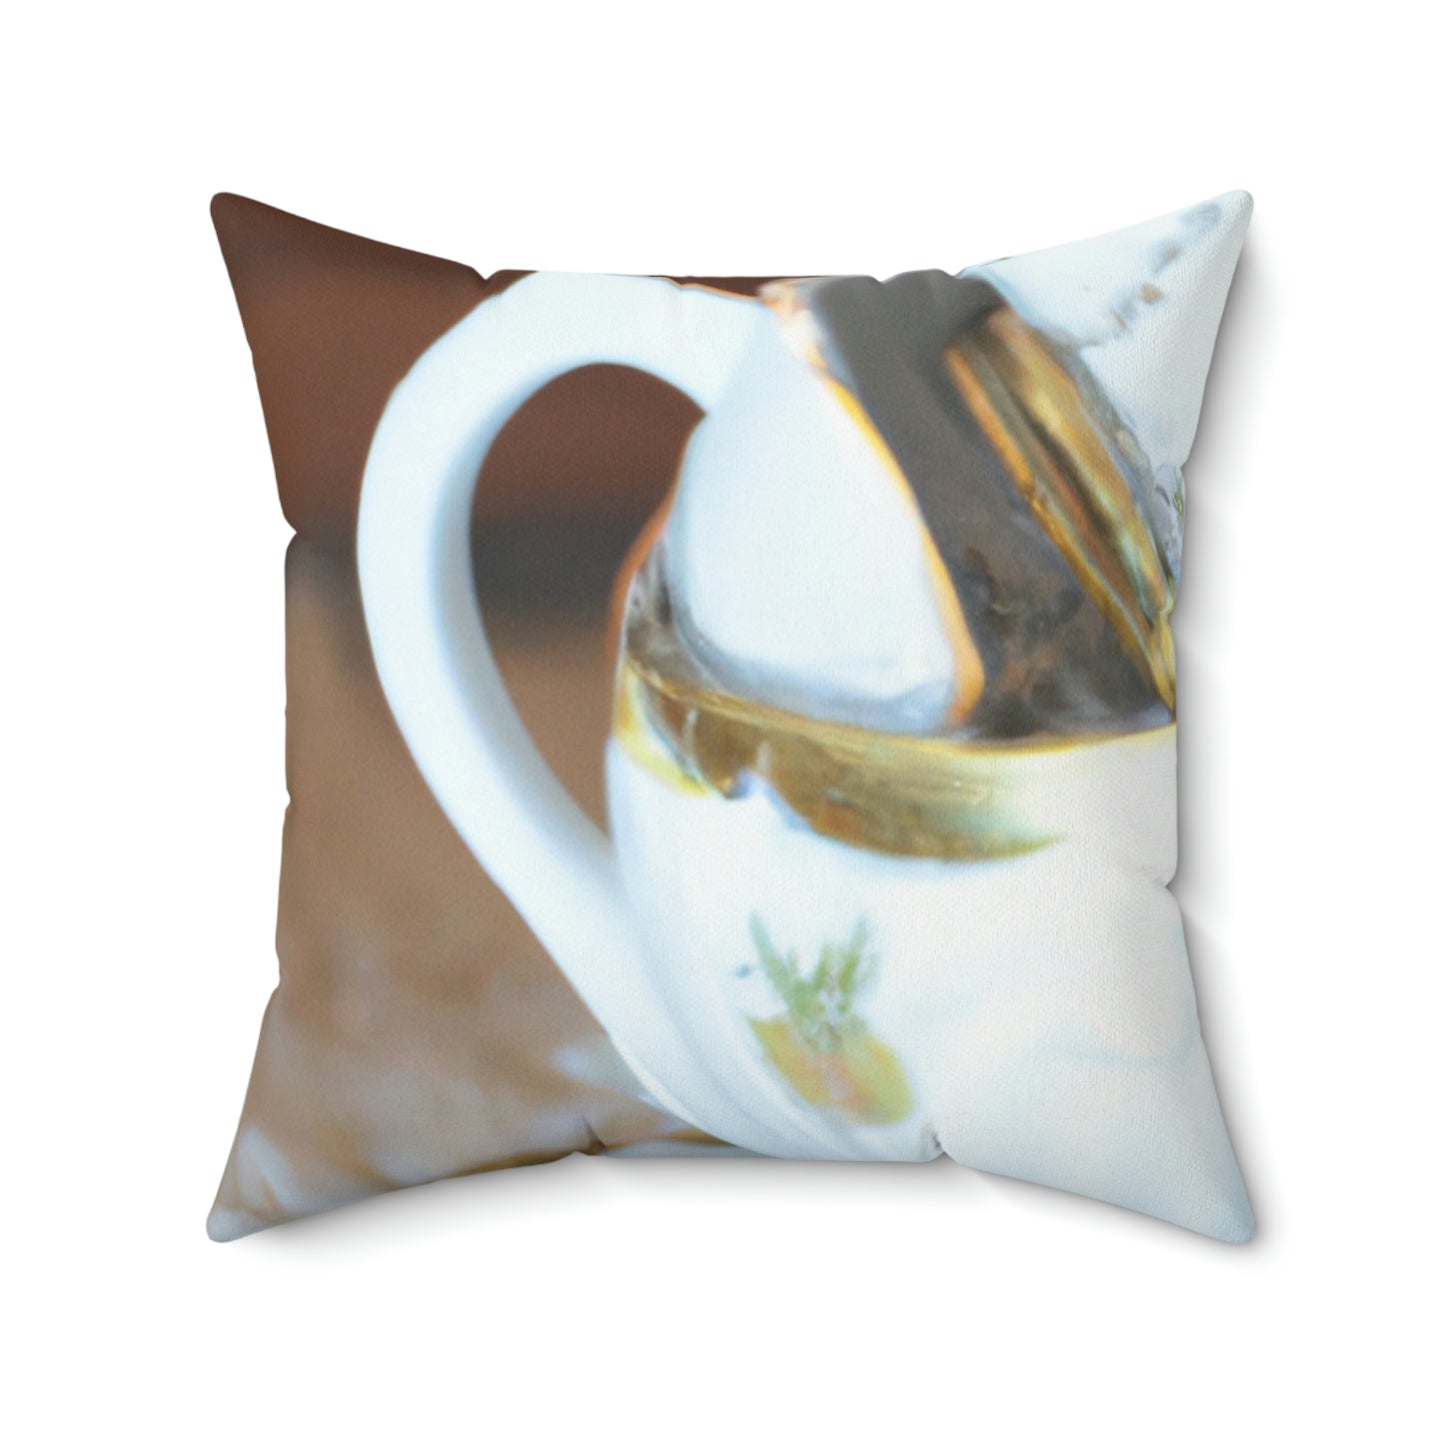 "A Cup of Comfort" - The Alien Square Pillow